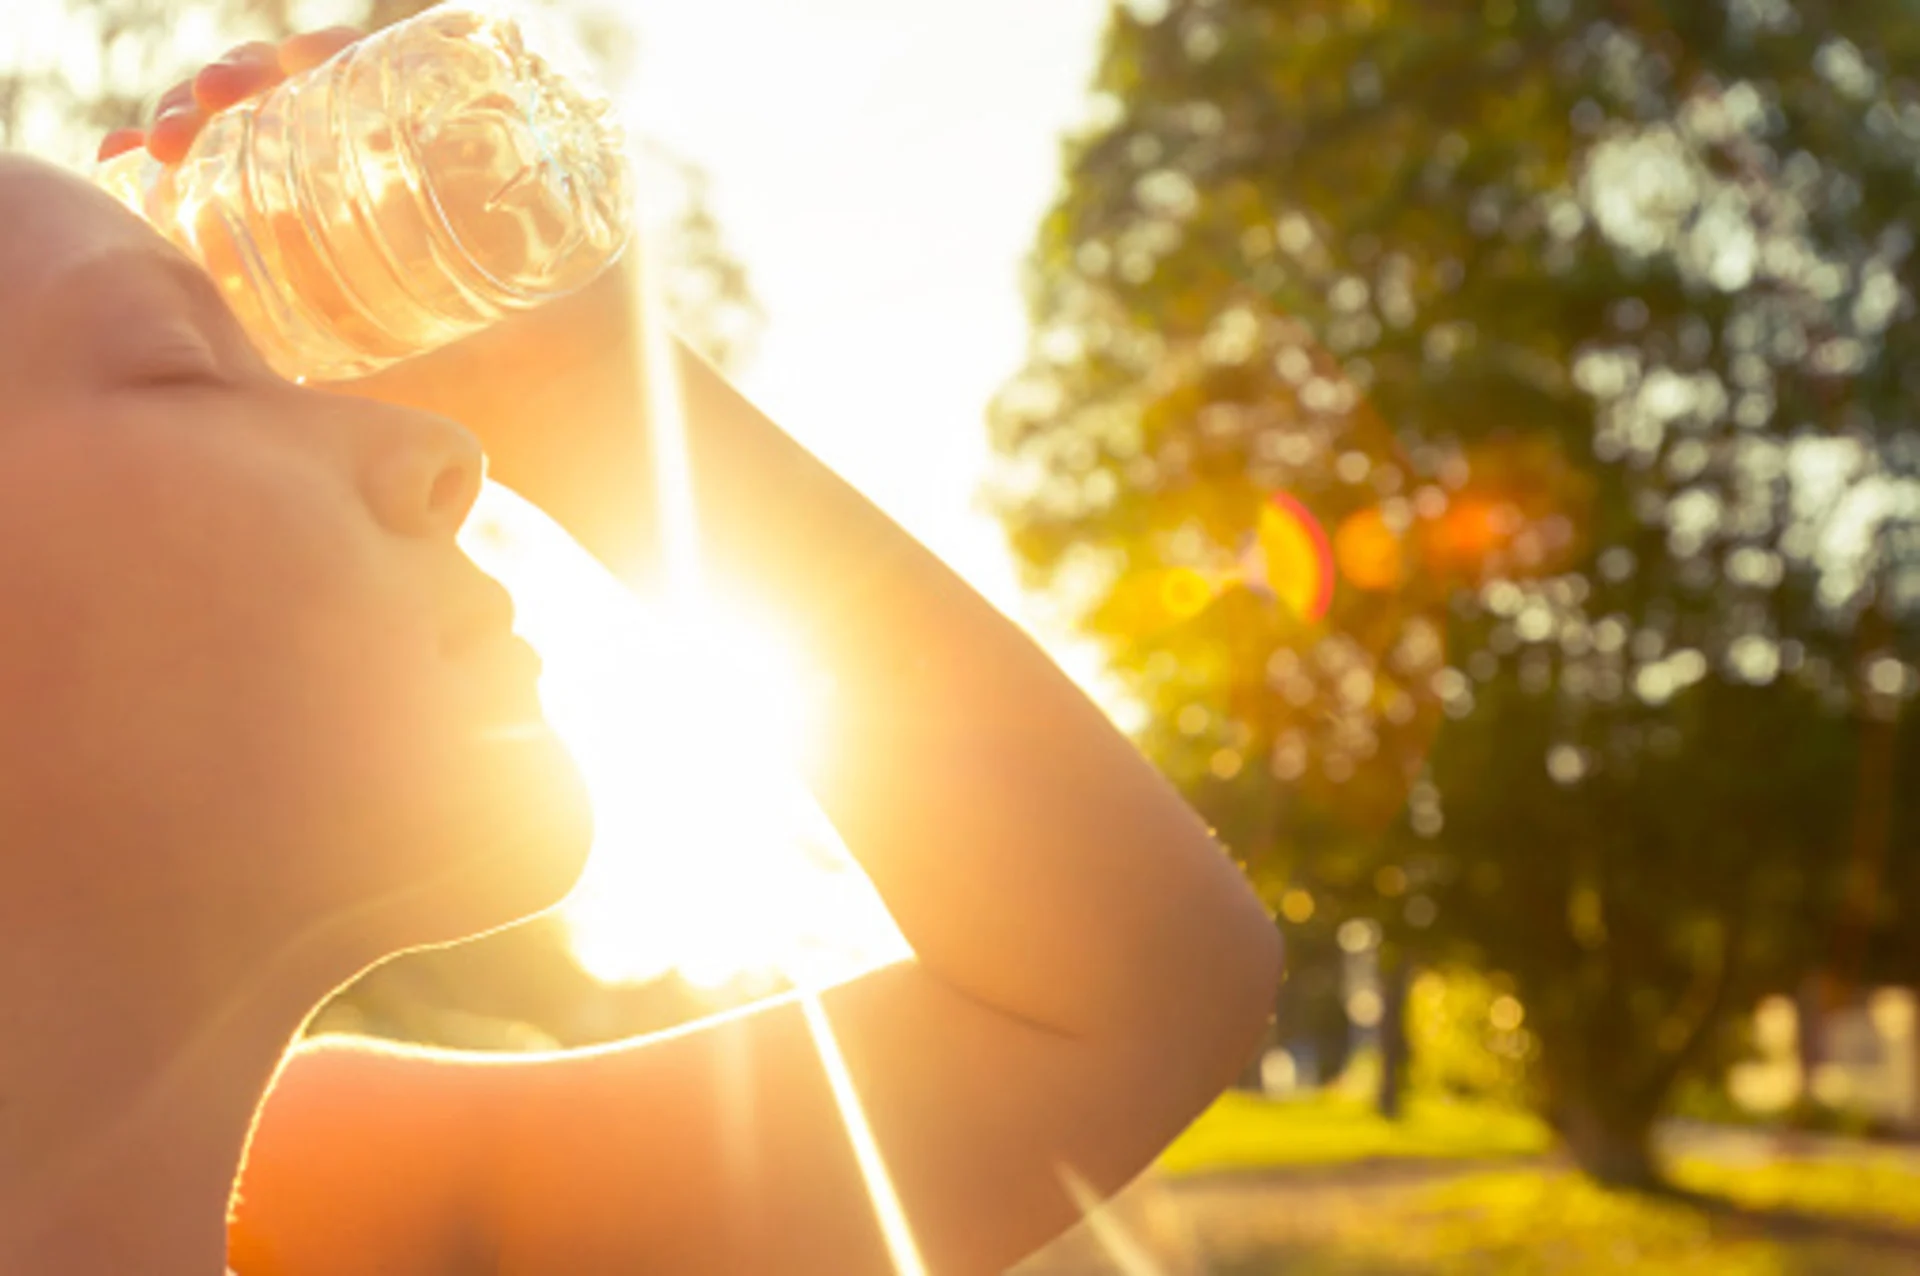 New study suggests heat waves can damage organs